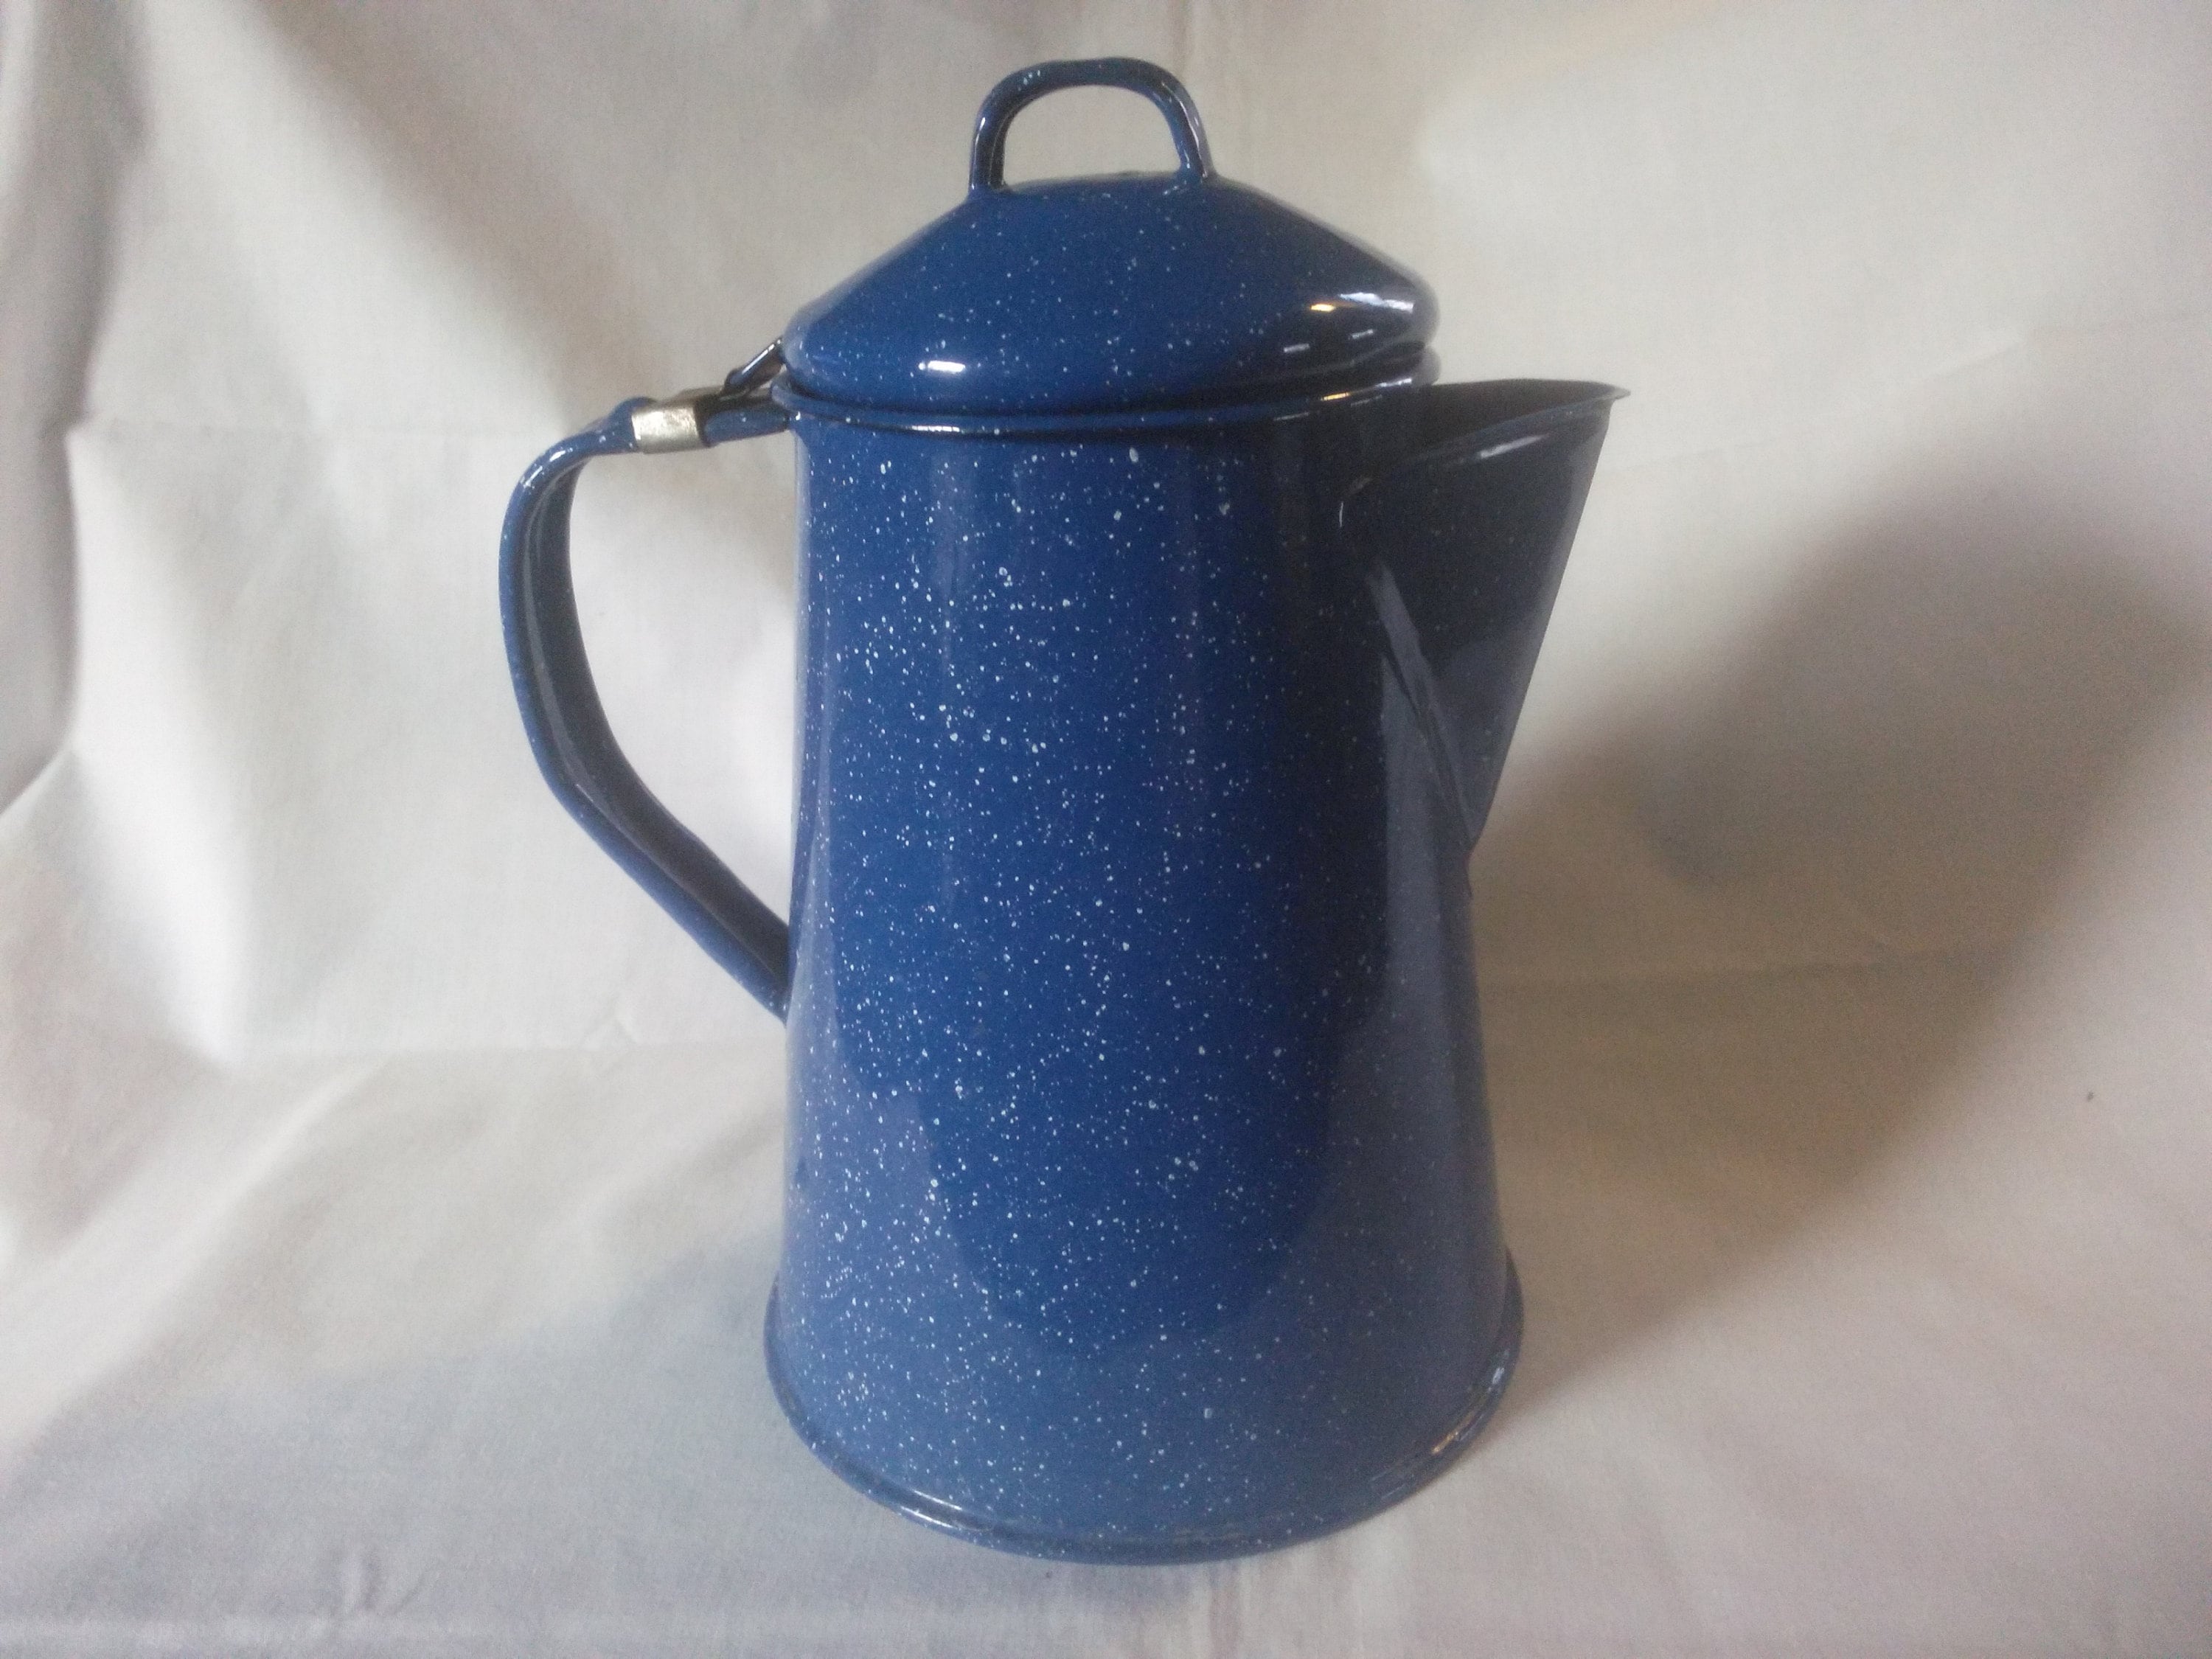 Cinsa Enamelware Coffee Pot (Turquoise Color) - 8 Cups - Camping